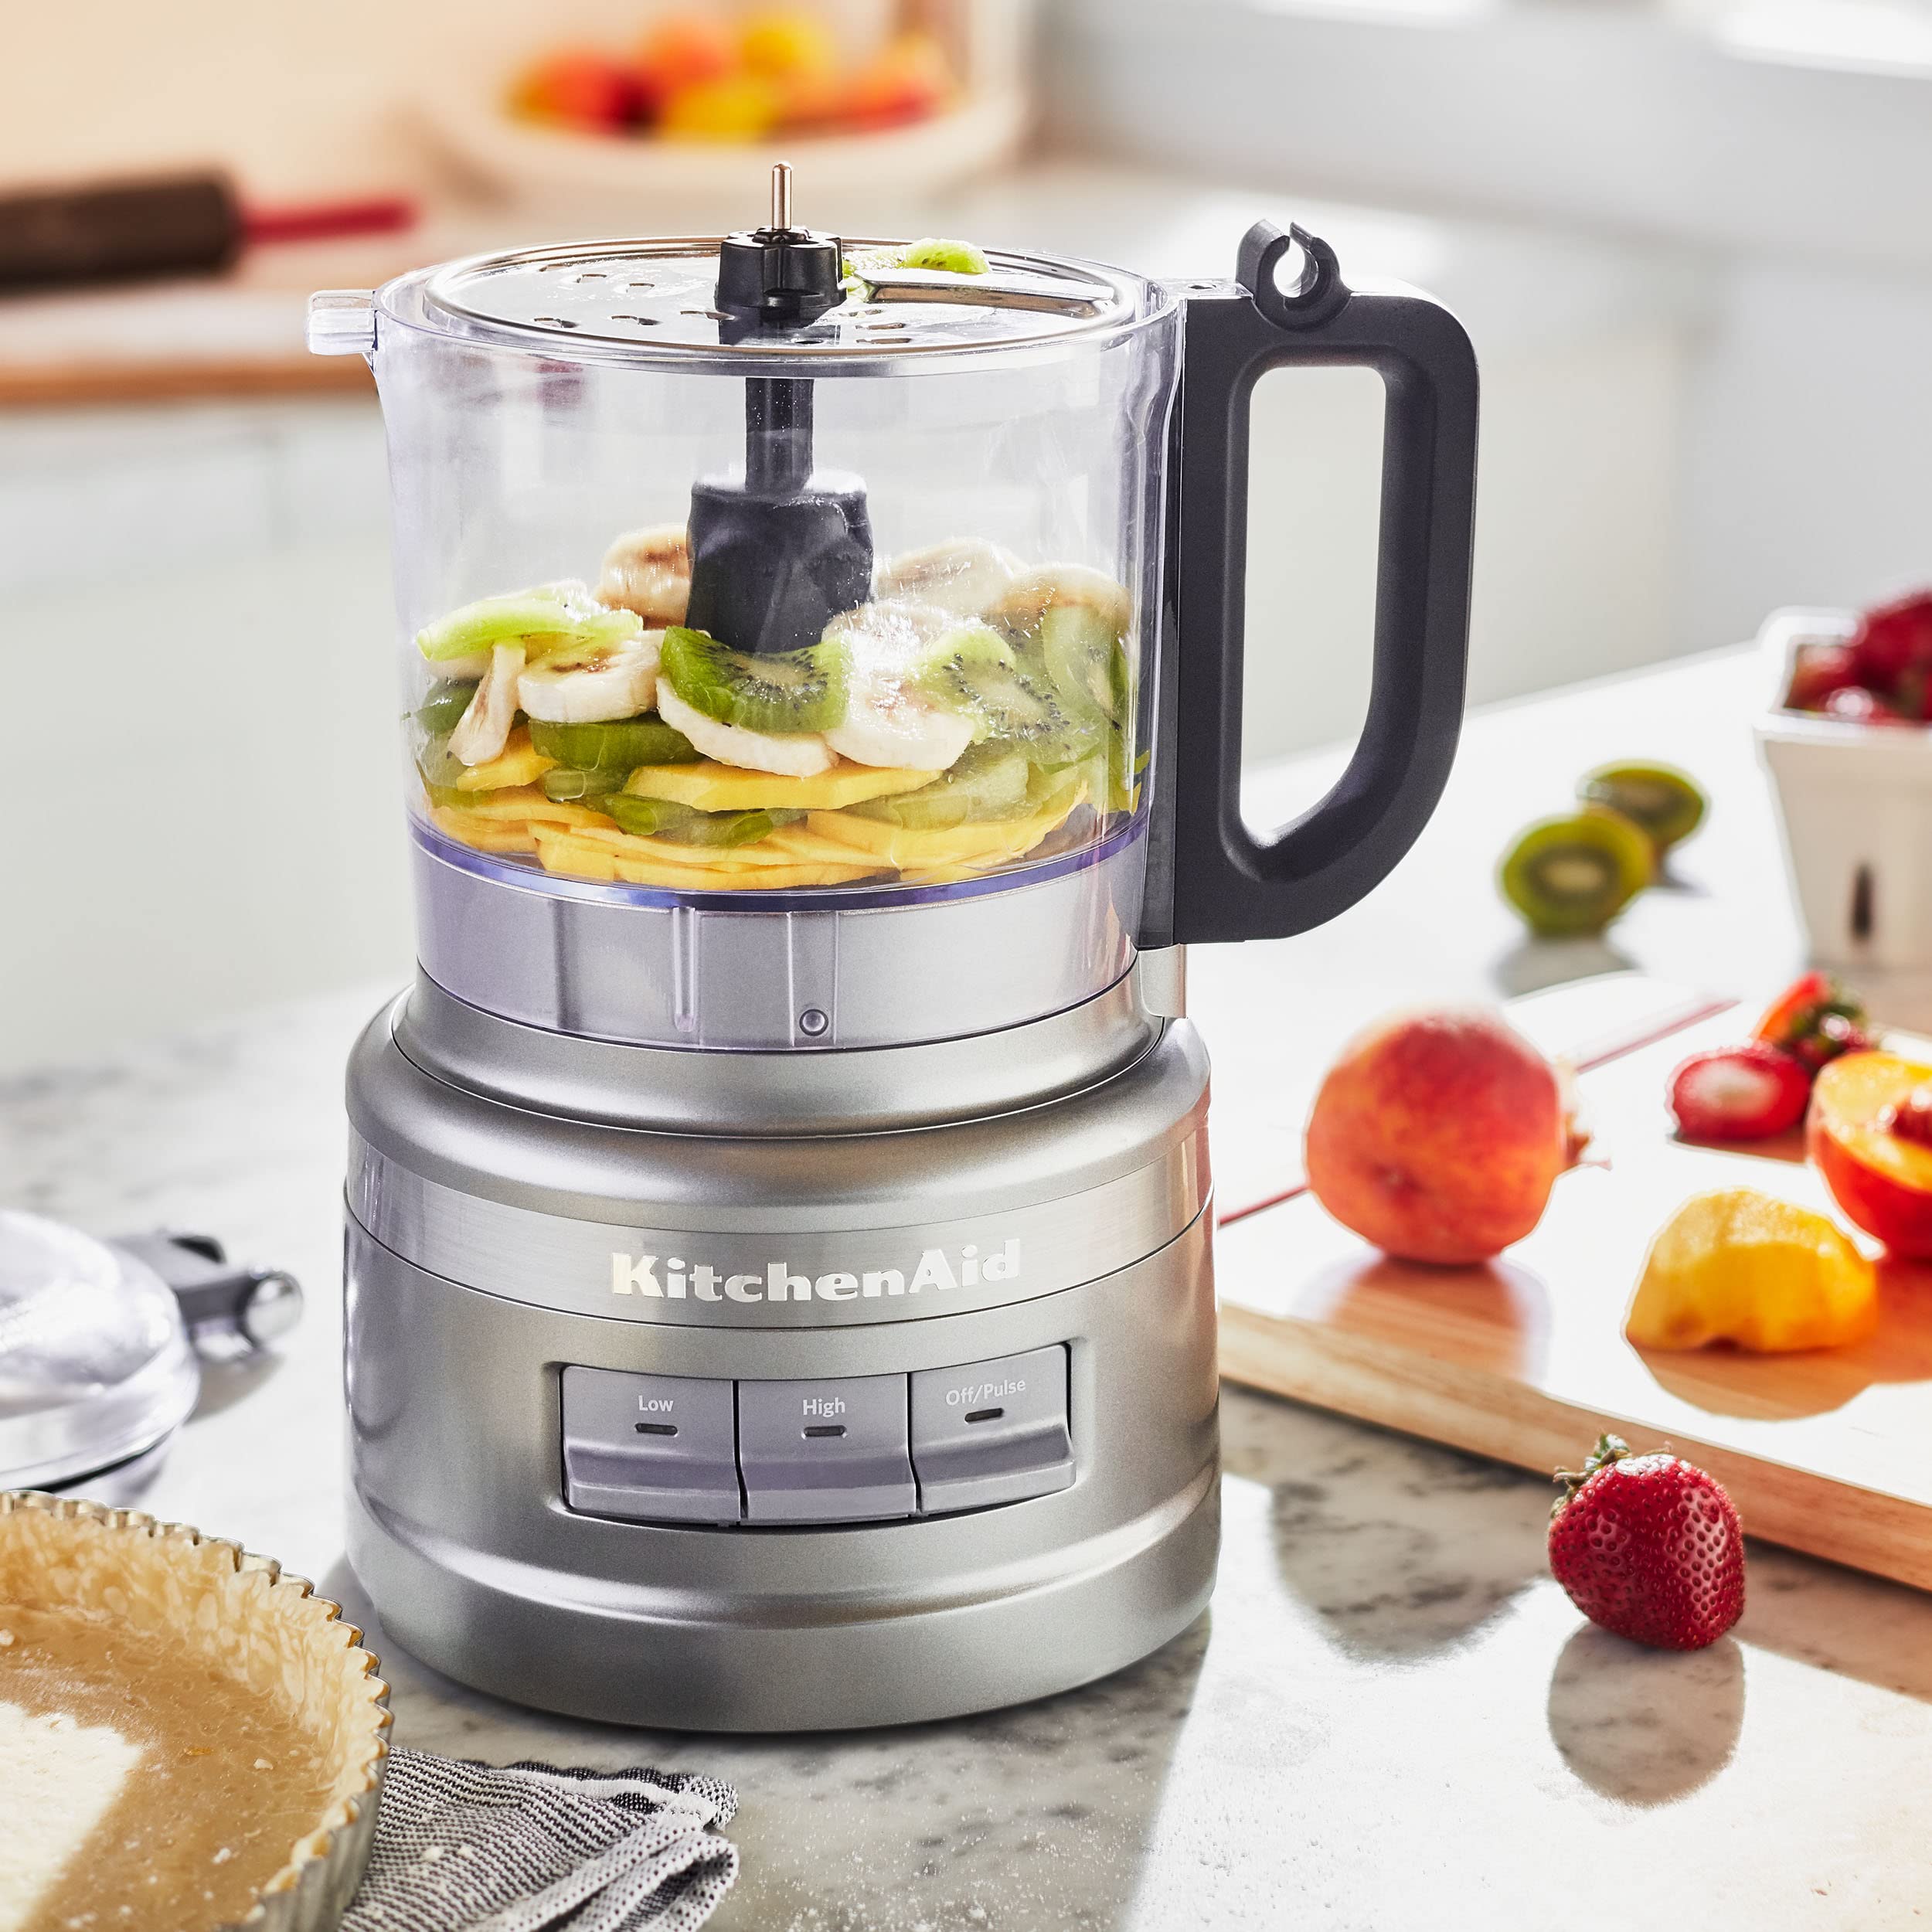 13 Superior Kitchenaid Food Processor 7 Cup For 2023